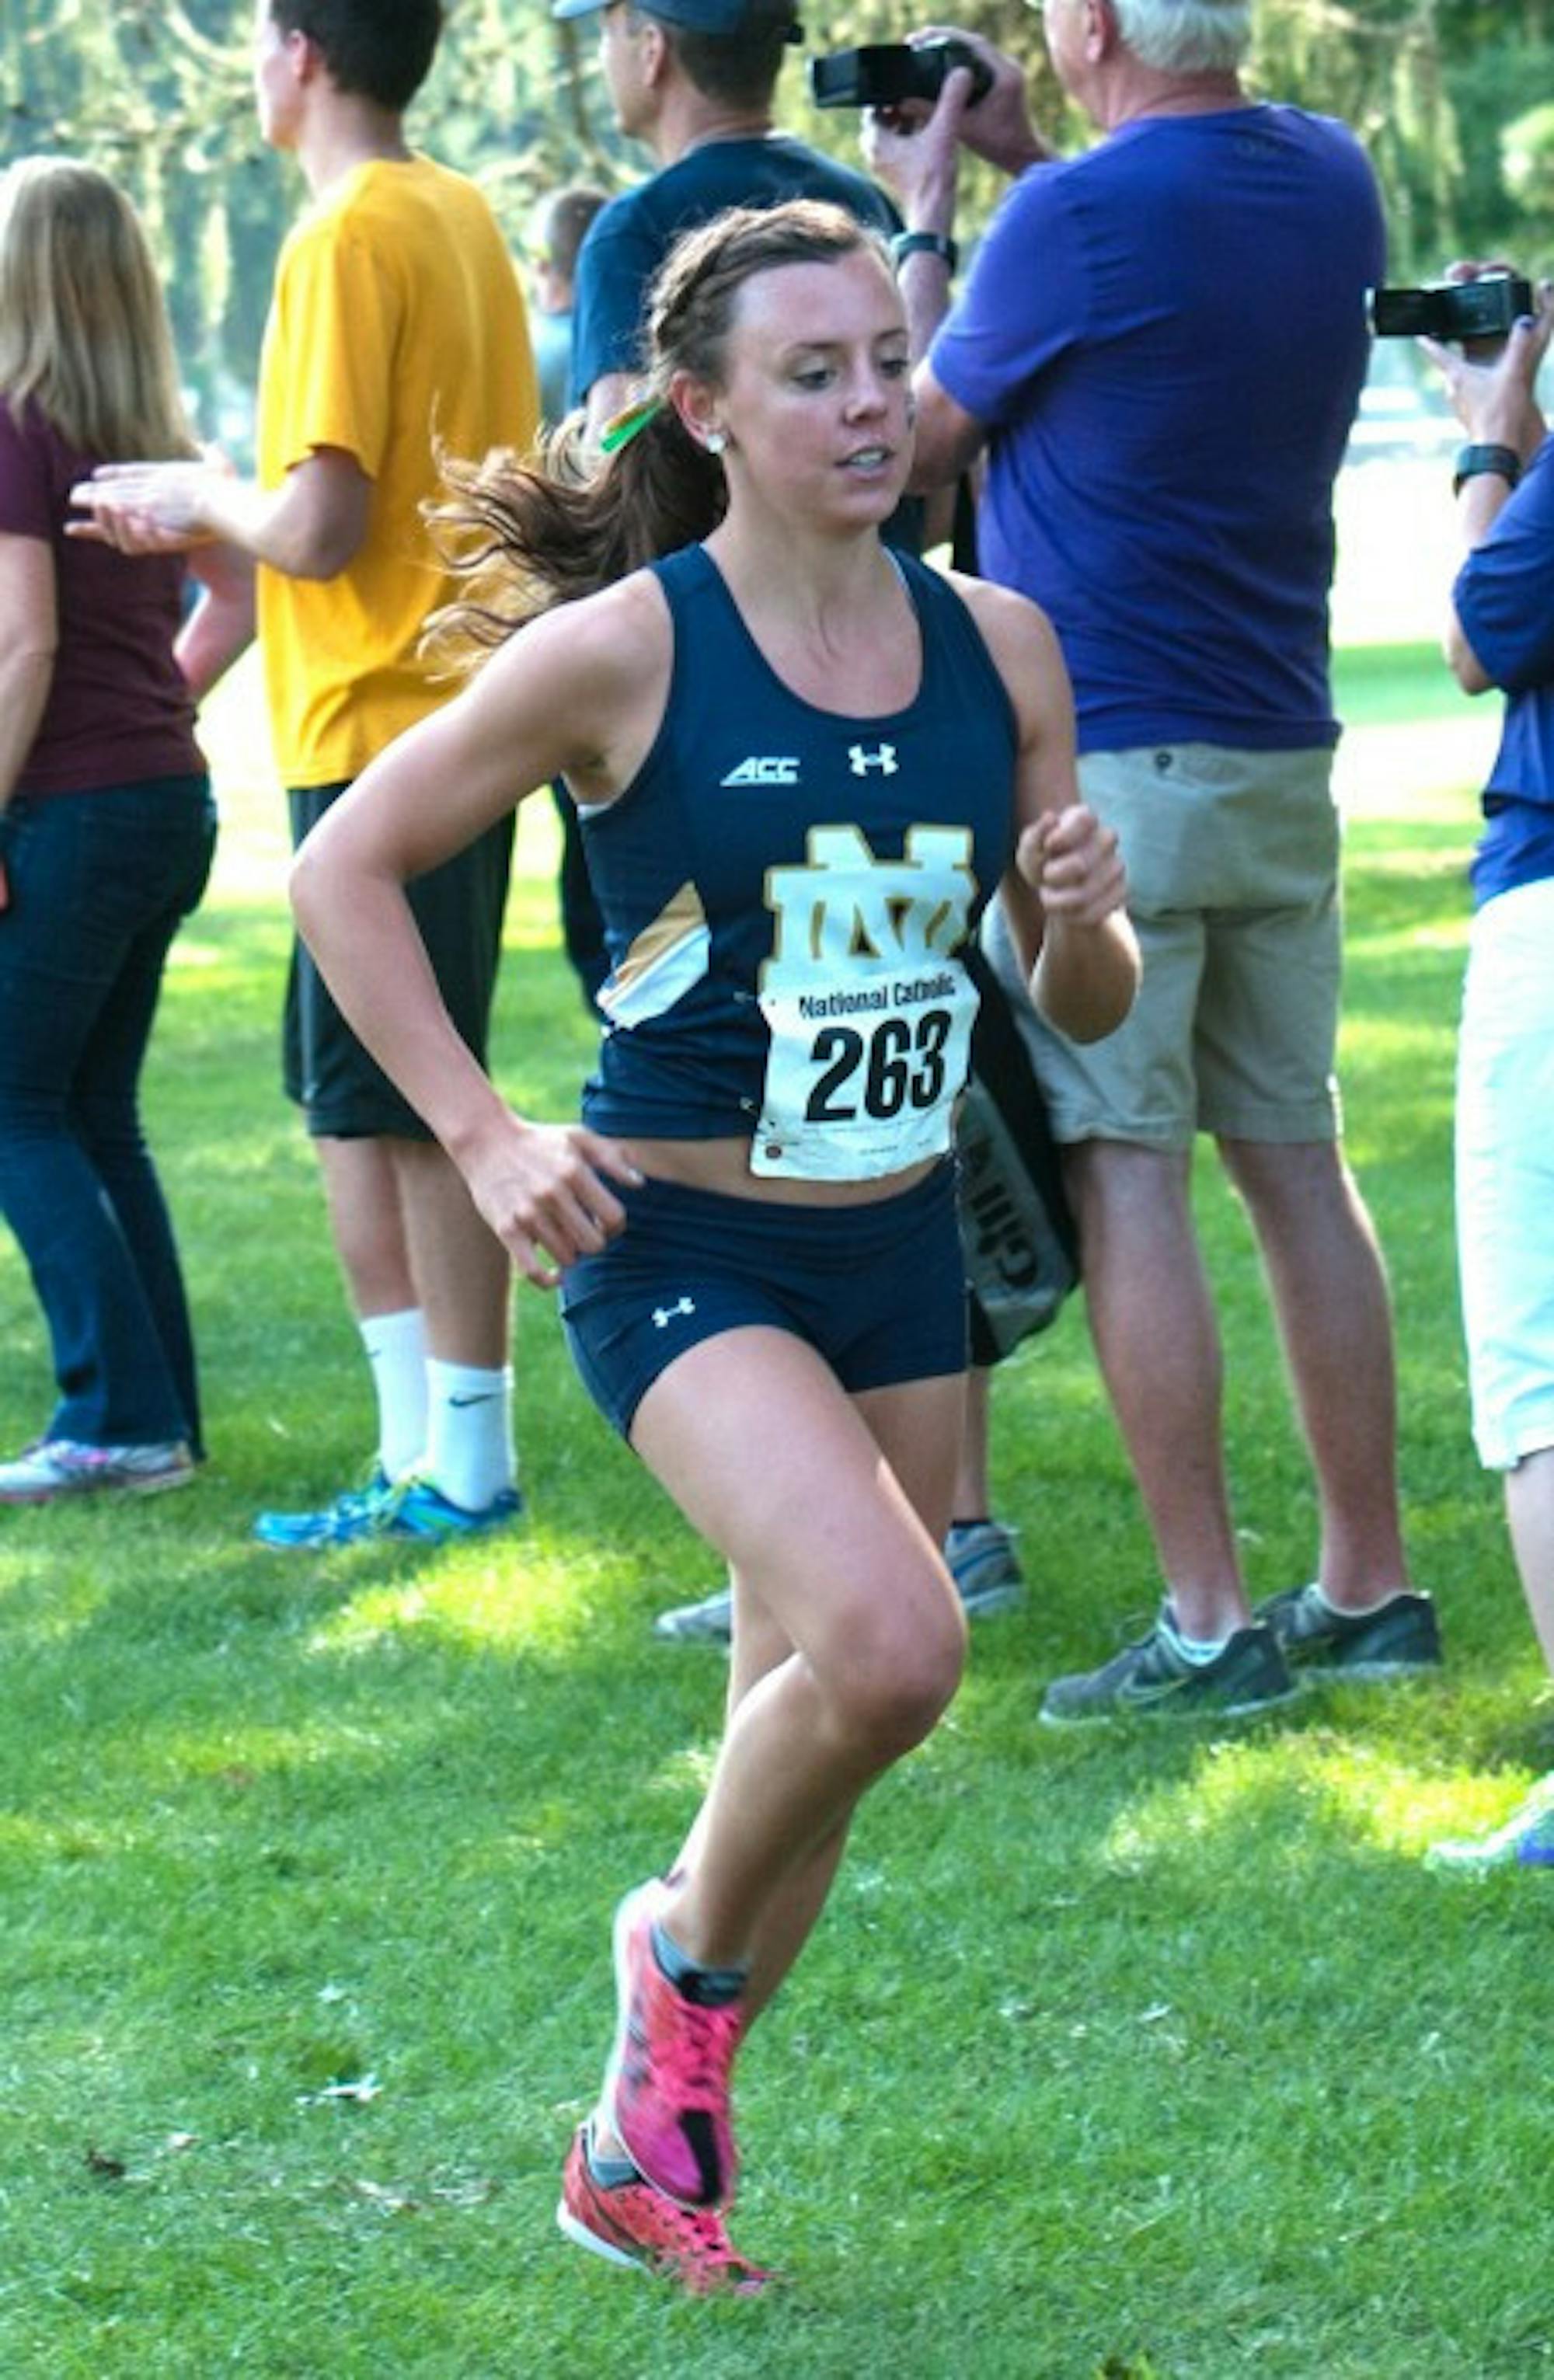 Irish graduate student Sydni Meunier begins her 5k race during the National Catholic Championship at Notre Dame on Sep. 19 during the 2014 season. Munier finished 7th overall out of the field of 91 runners.